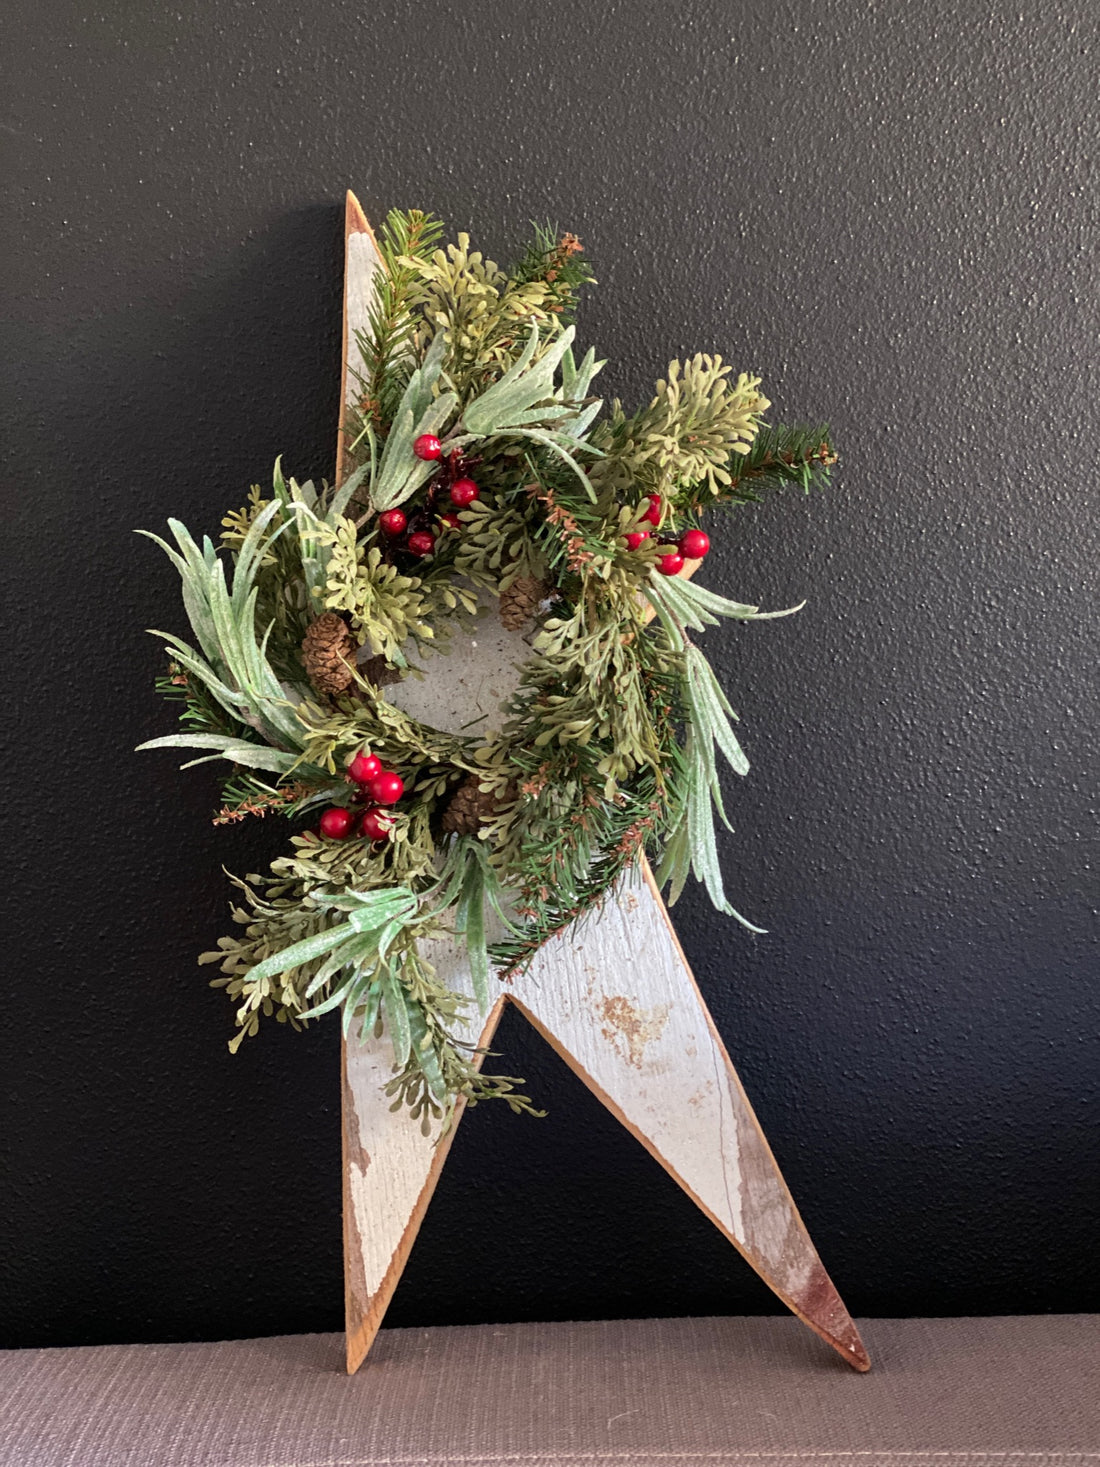 Hanging White Painted Wooden Star with Pinecone Wreath